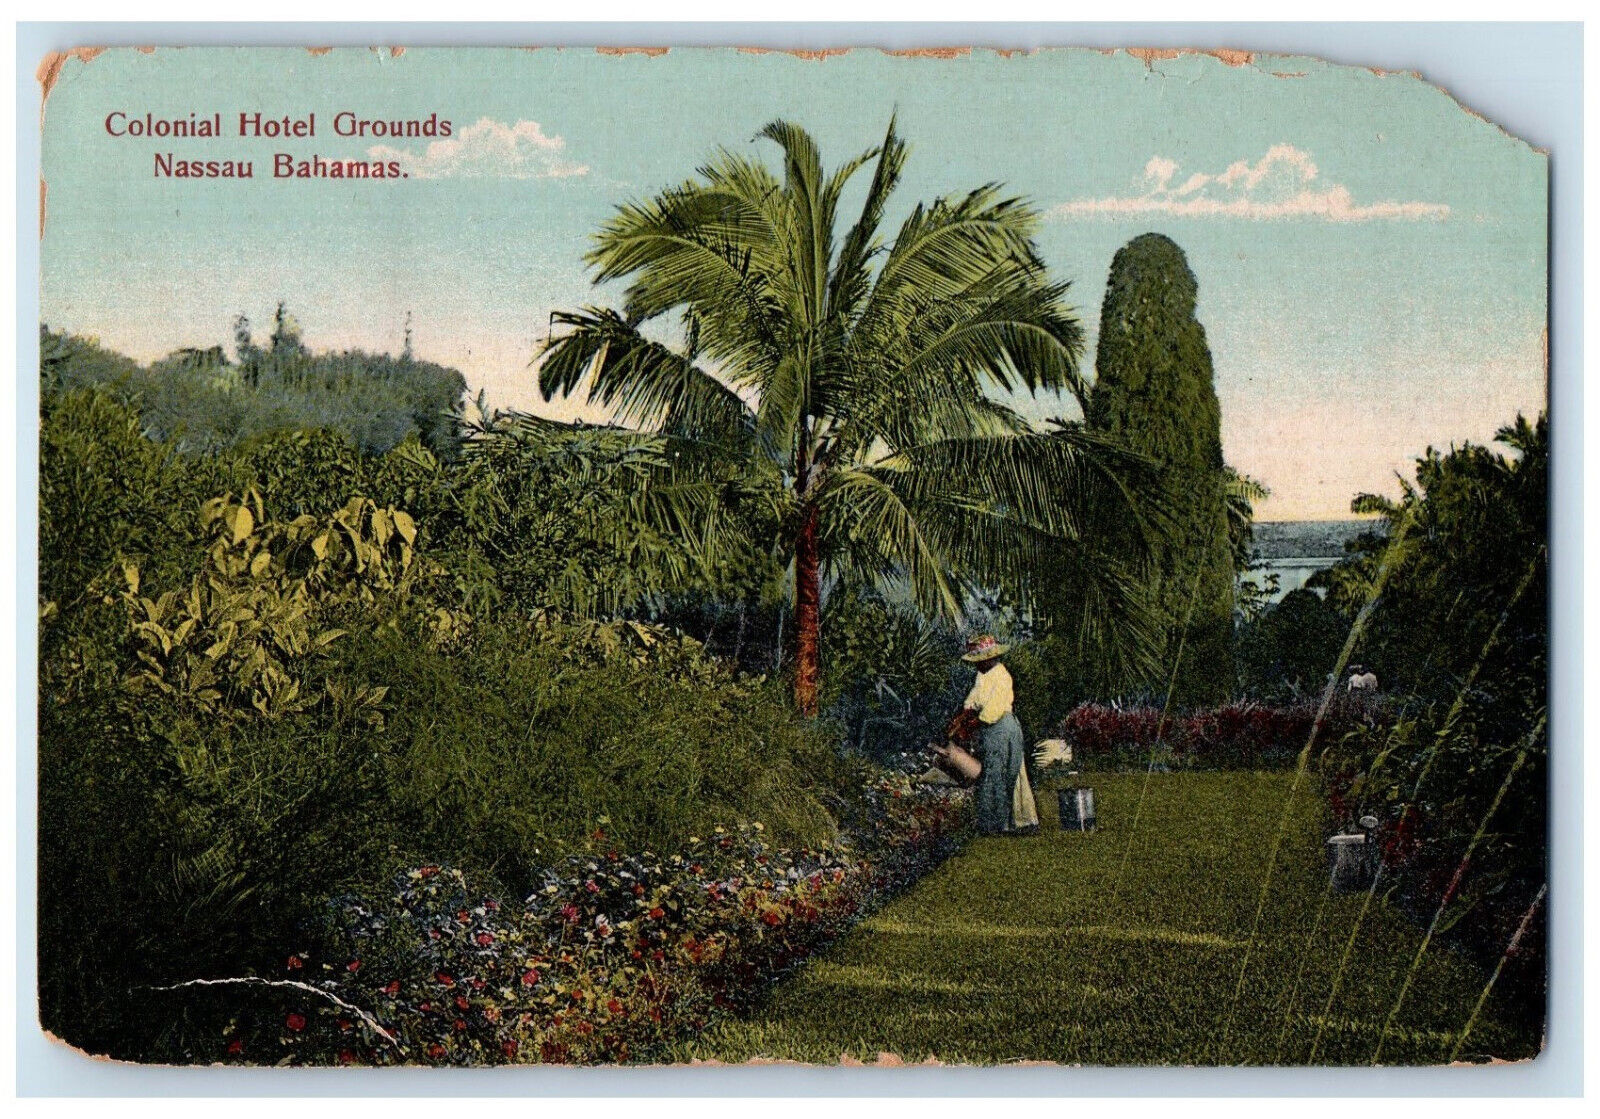 1914 Watering Plants Colonial Hotel Grounds Nassau Bahamas Antique Postcard